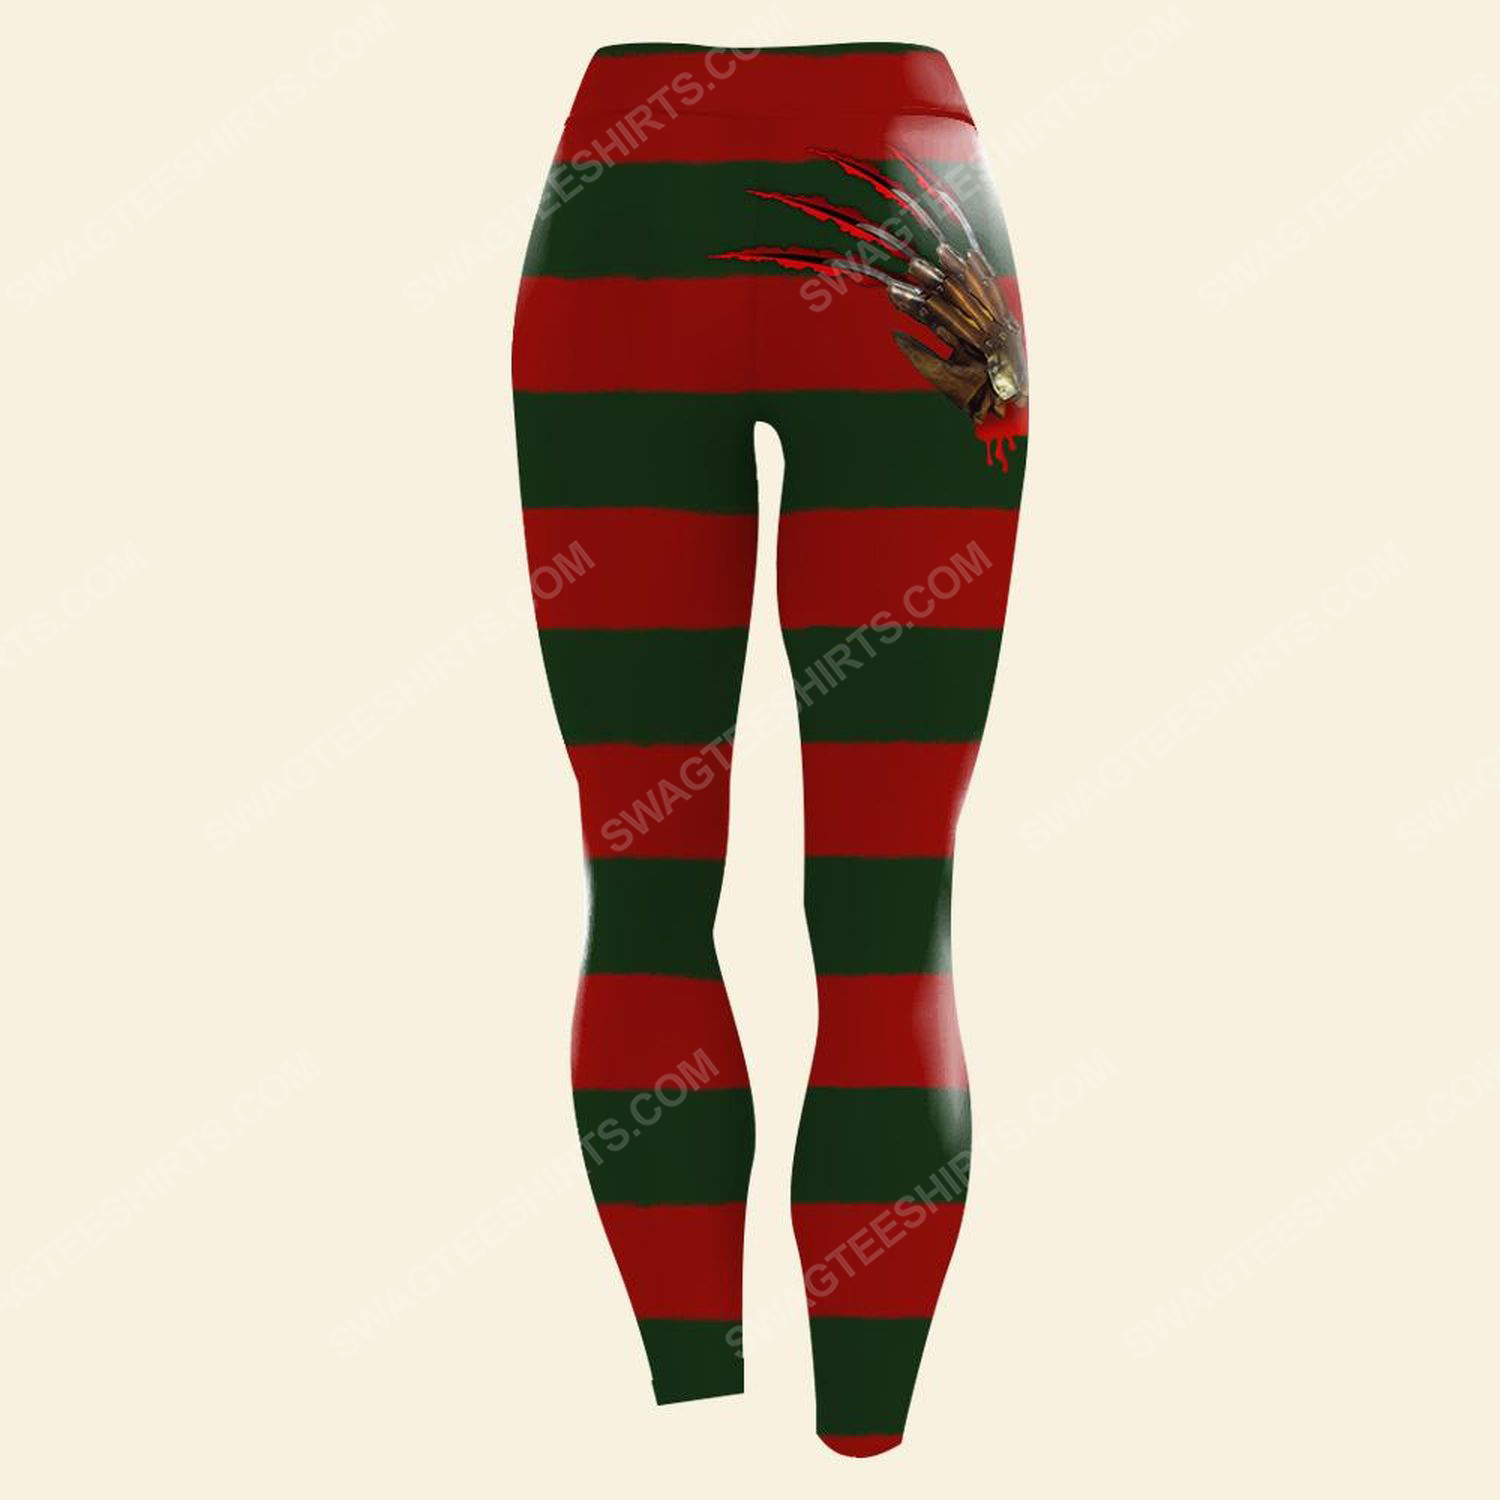 [special edition] Halloween freddy’s nightmares gloved hand with razors leggings – maria